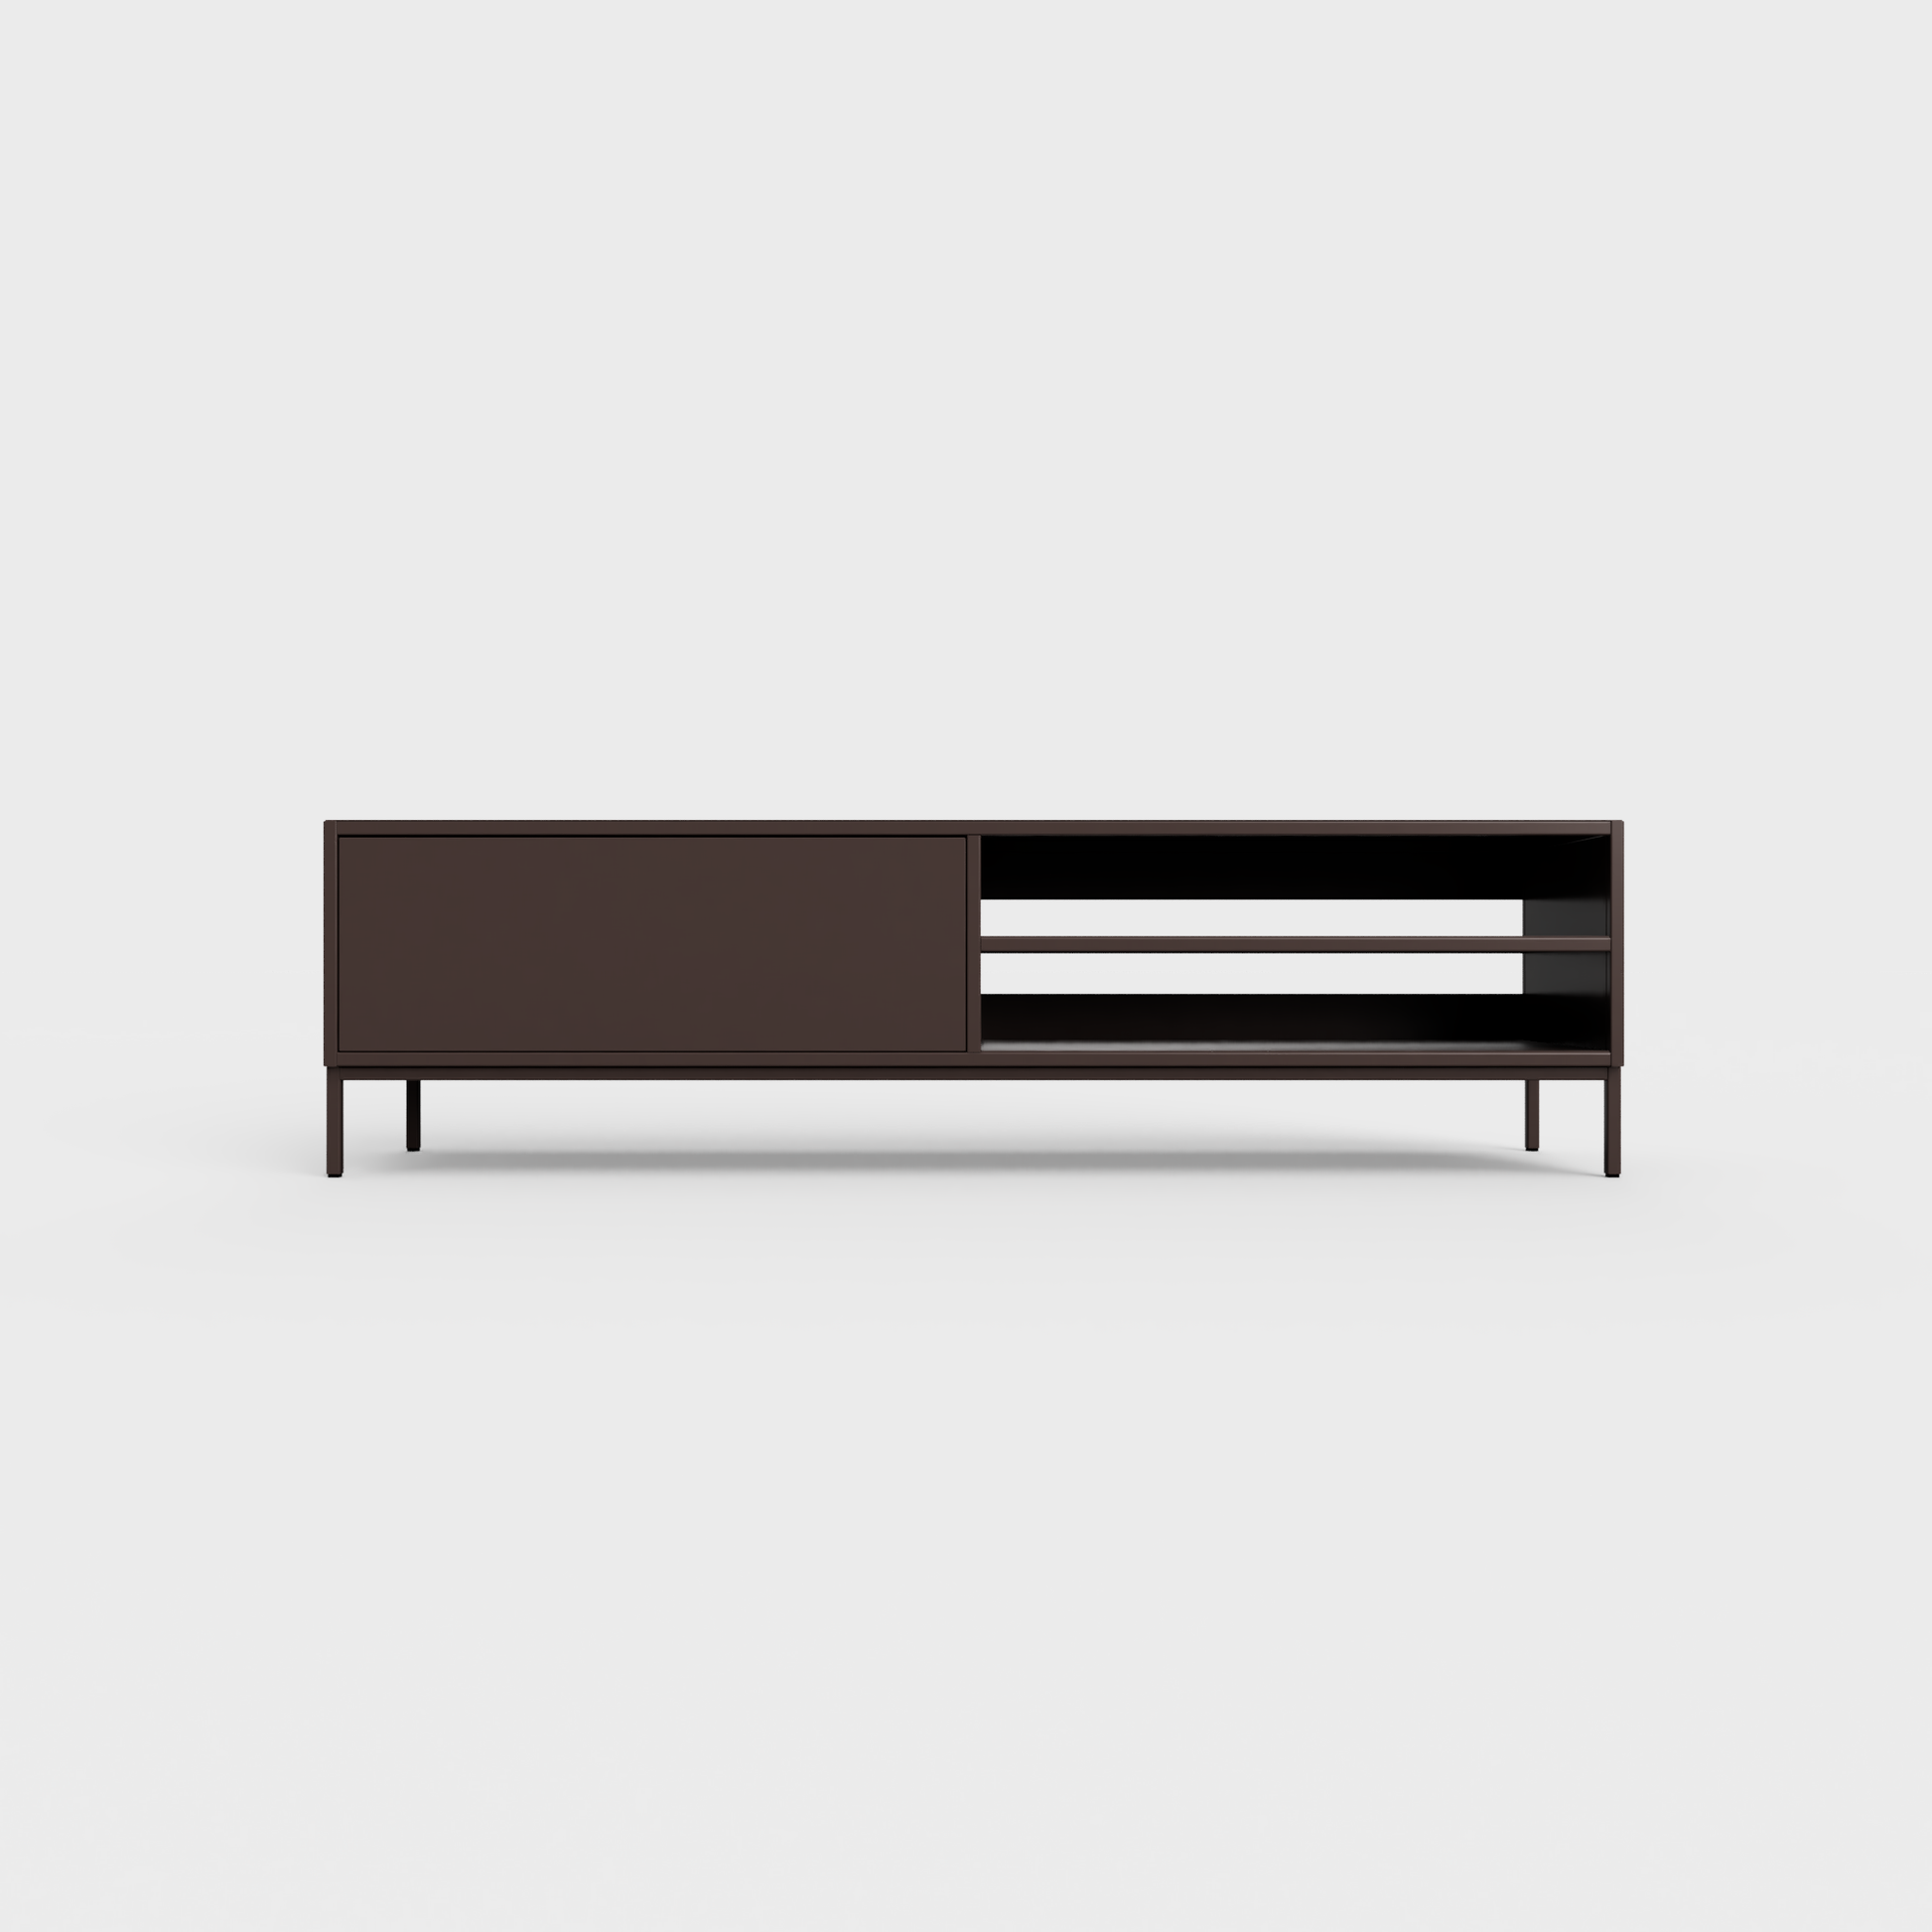 Prunus 02 Lowboard in Coffee color, powder-coated steel, elegant and modern piece of furniture for your living room